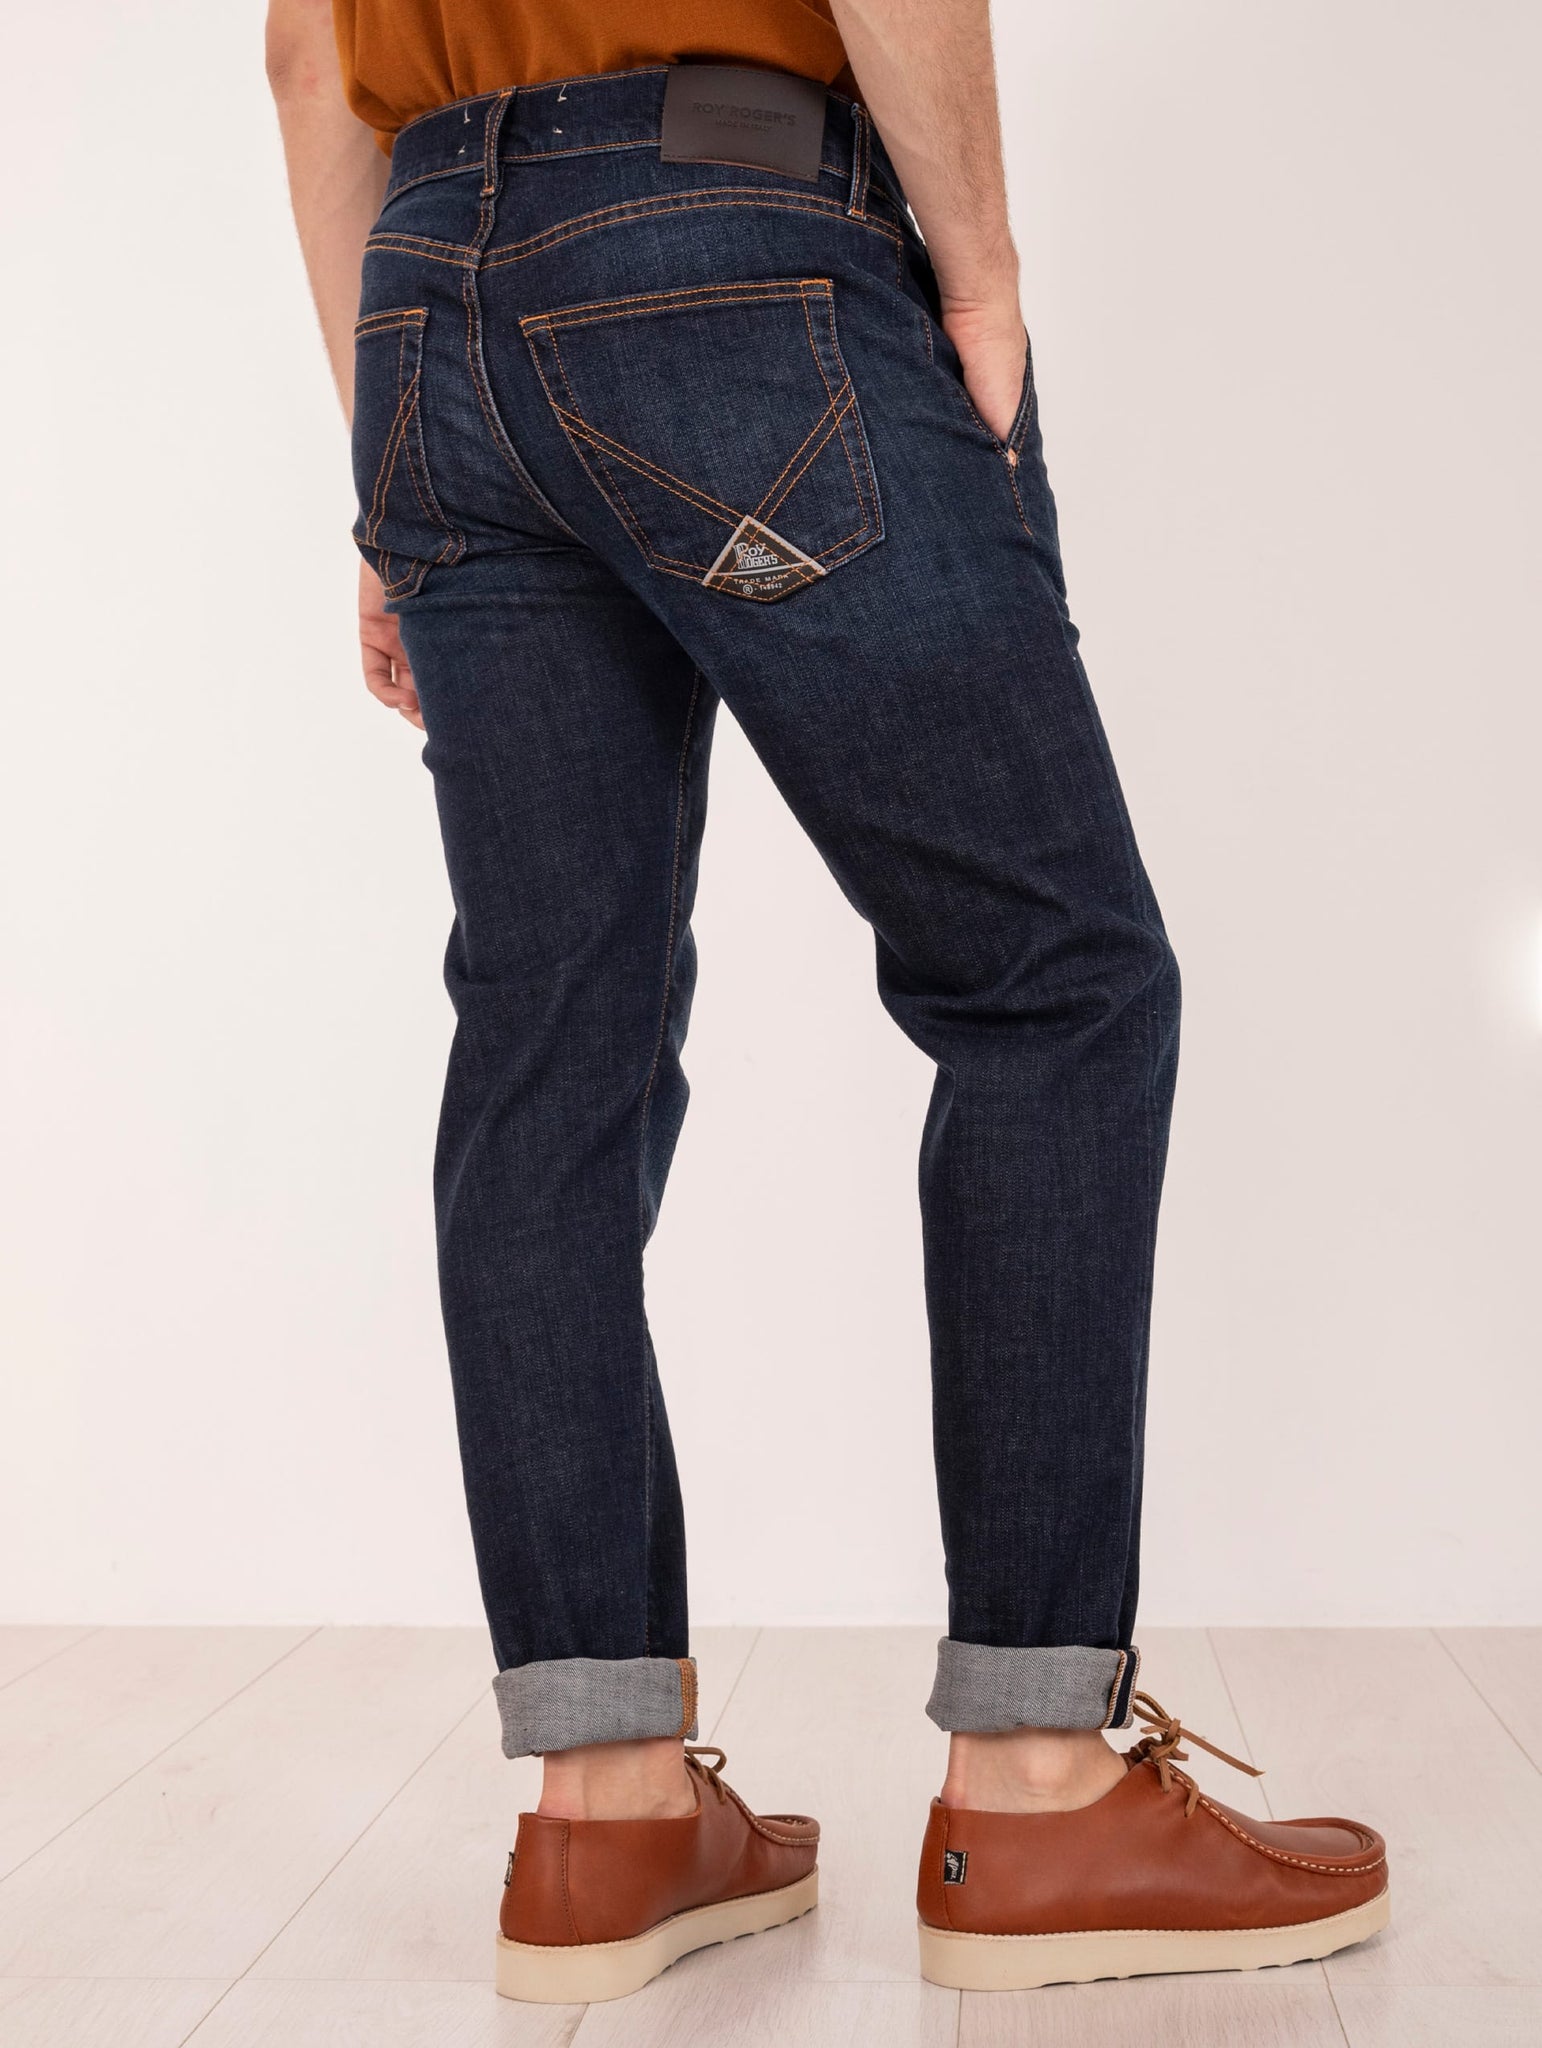 Jeans Roy Roger's Pater in Cotone Denim Scuro